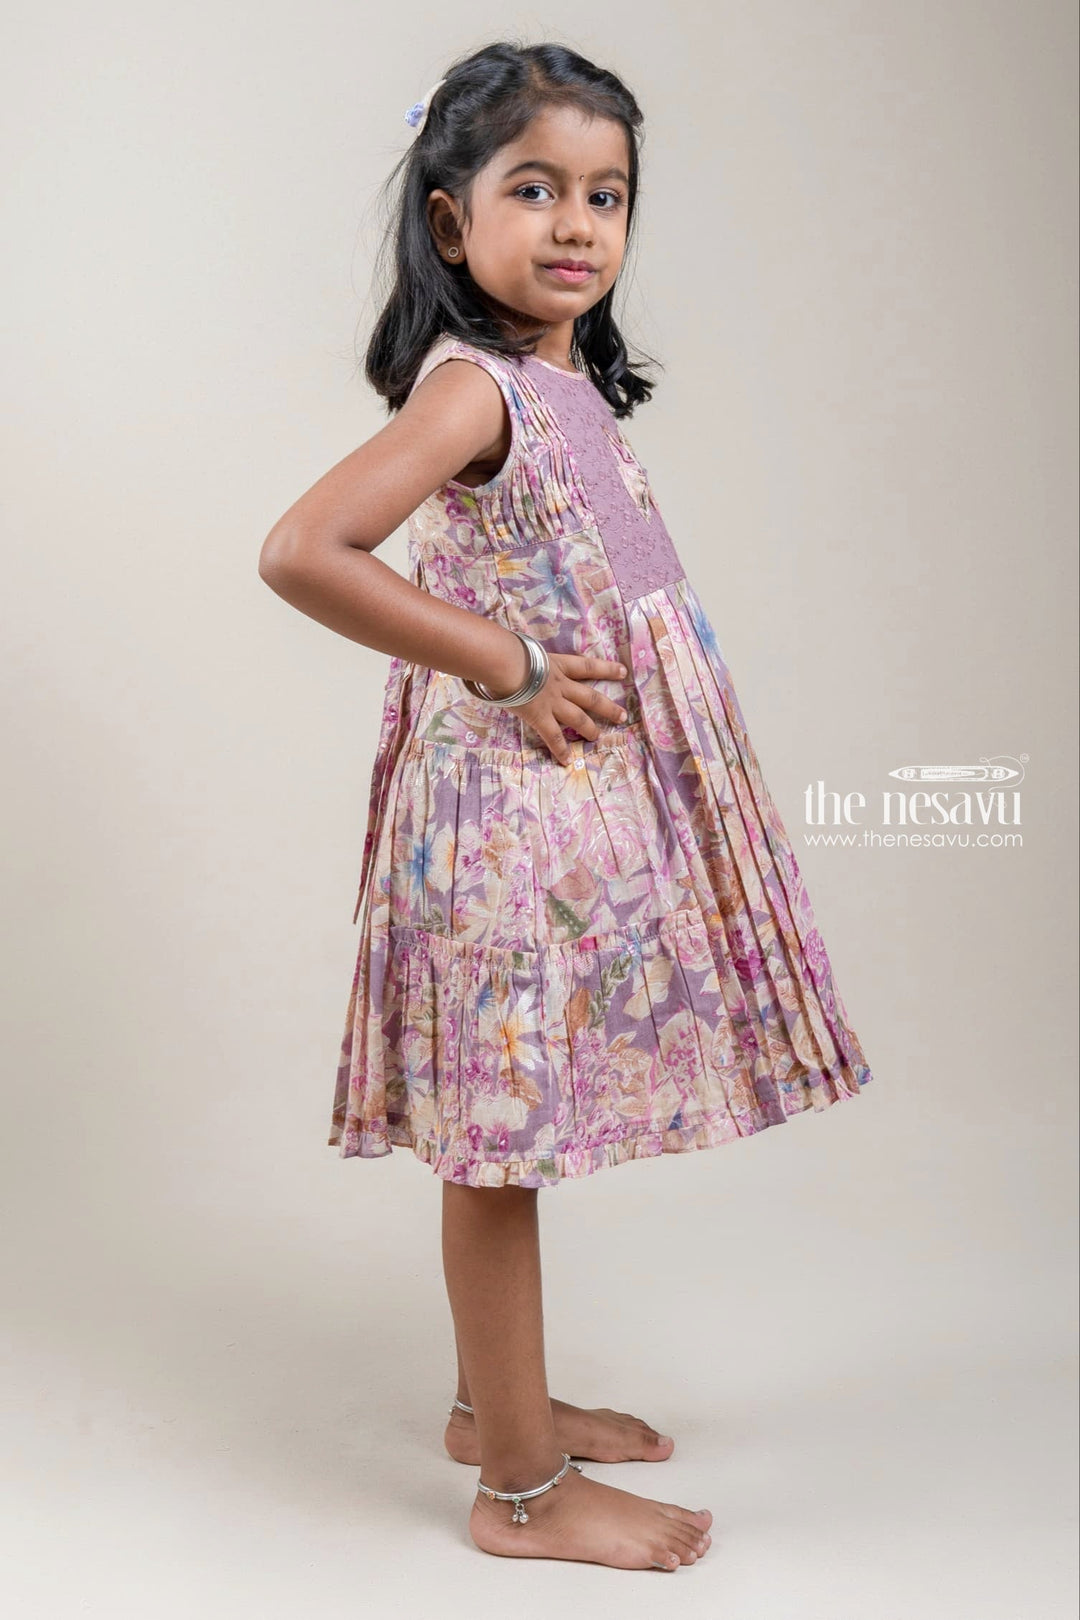 The Nesavu Girls Cotton Frock Stunning Purple Floral Printed Pleated Girls Cotton Frock With Bow Applique Nesavu Girls Frock Suit | Trendy Cotton Frock Collection | The Nesavu